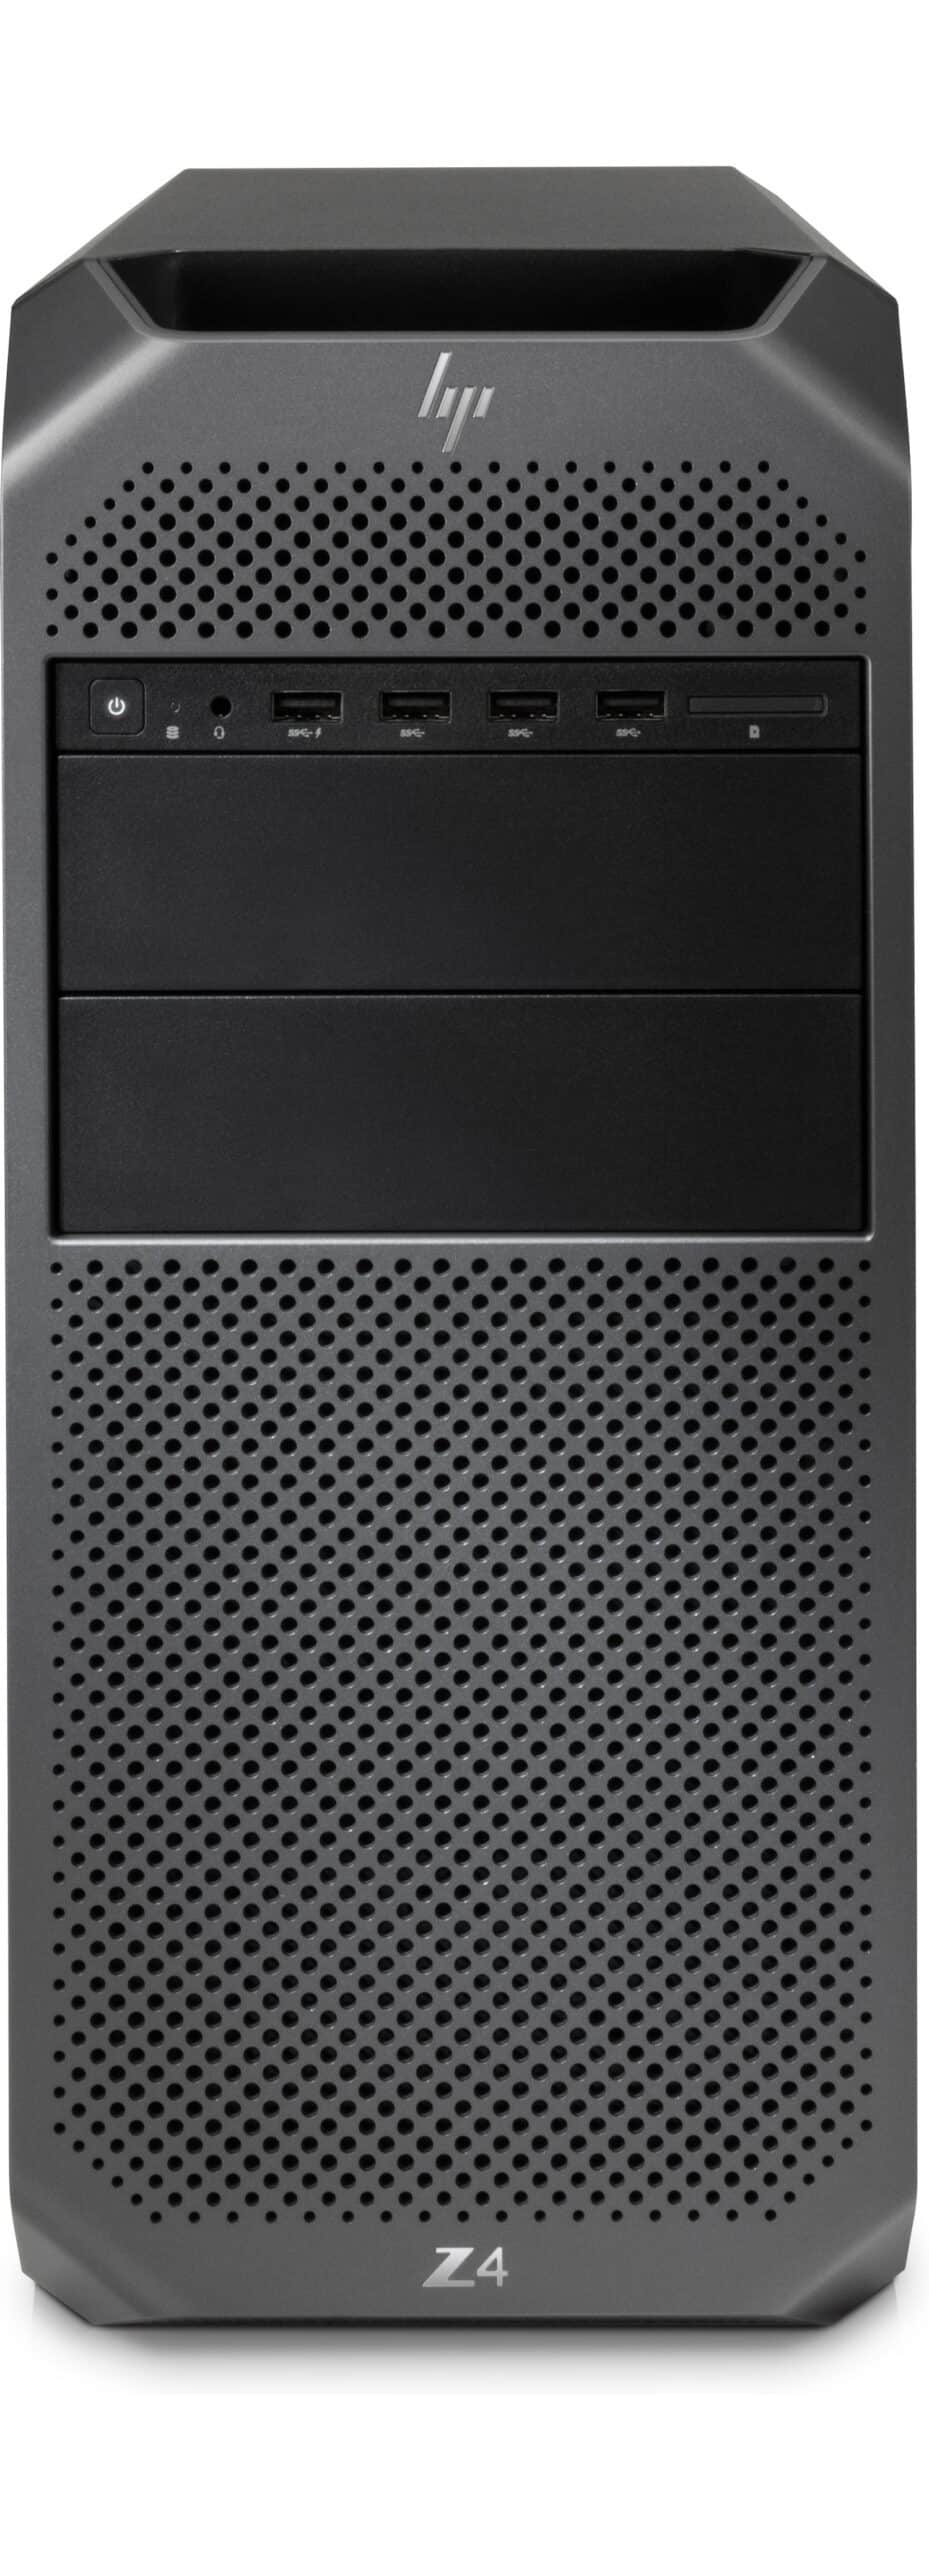 HP Z4 G4 Workstation Tower | Intel Xeon W-2125 4Cores | Ram 32Gb | SSD 1Tb nvme | Nvidia Quadro P2000 | Windows 11 Pro The unrivaled workstation